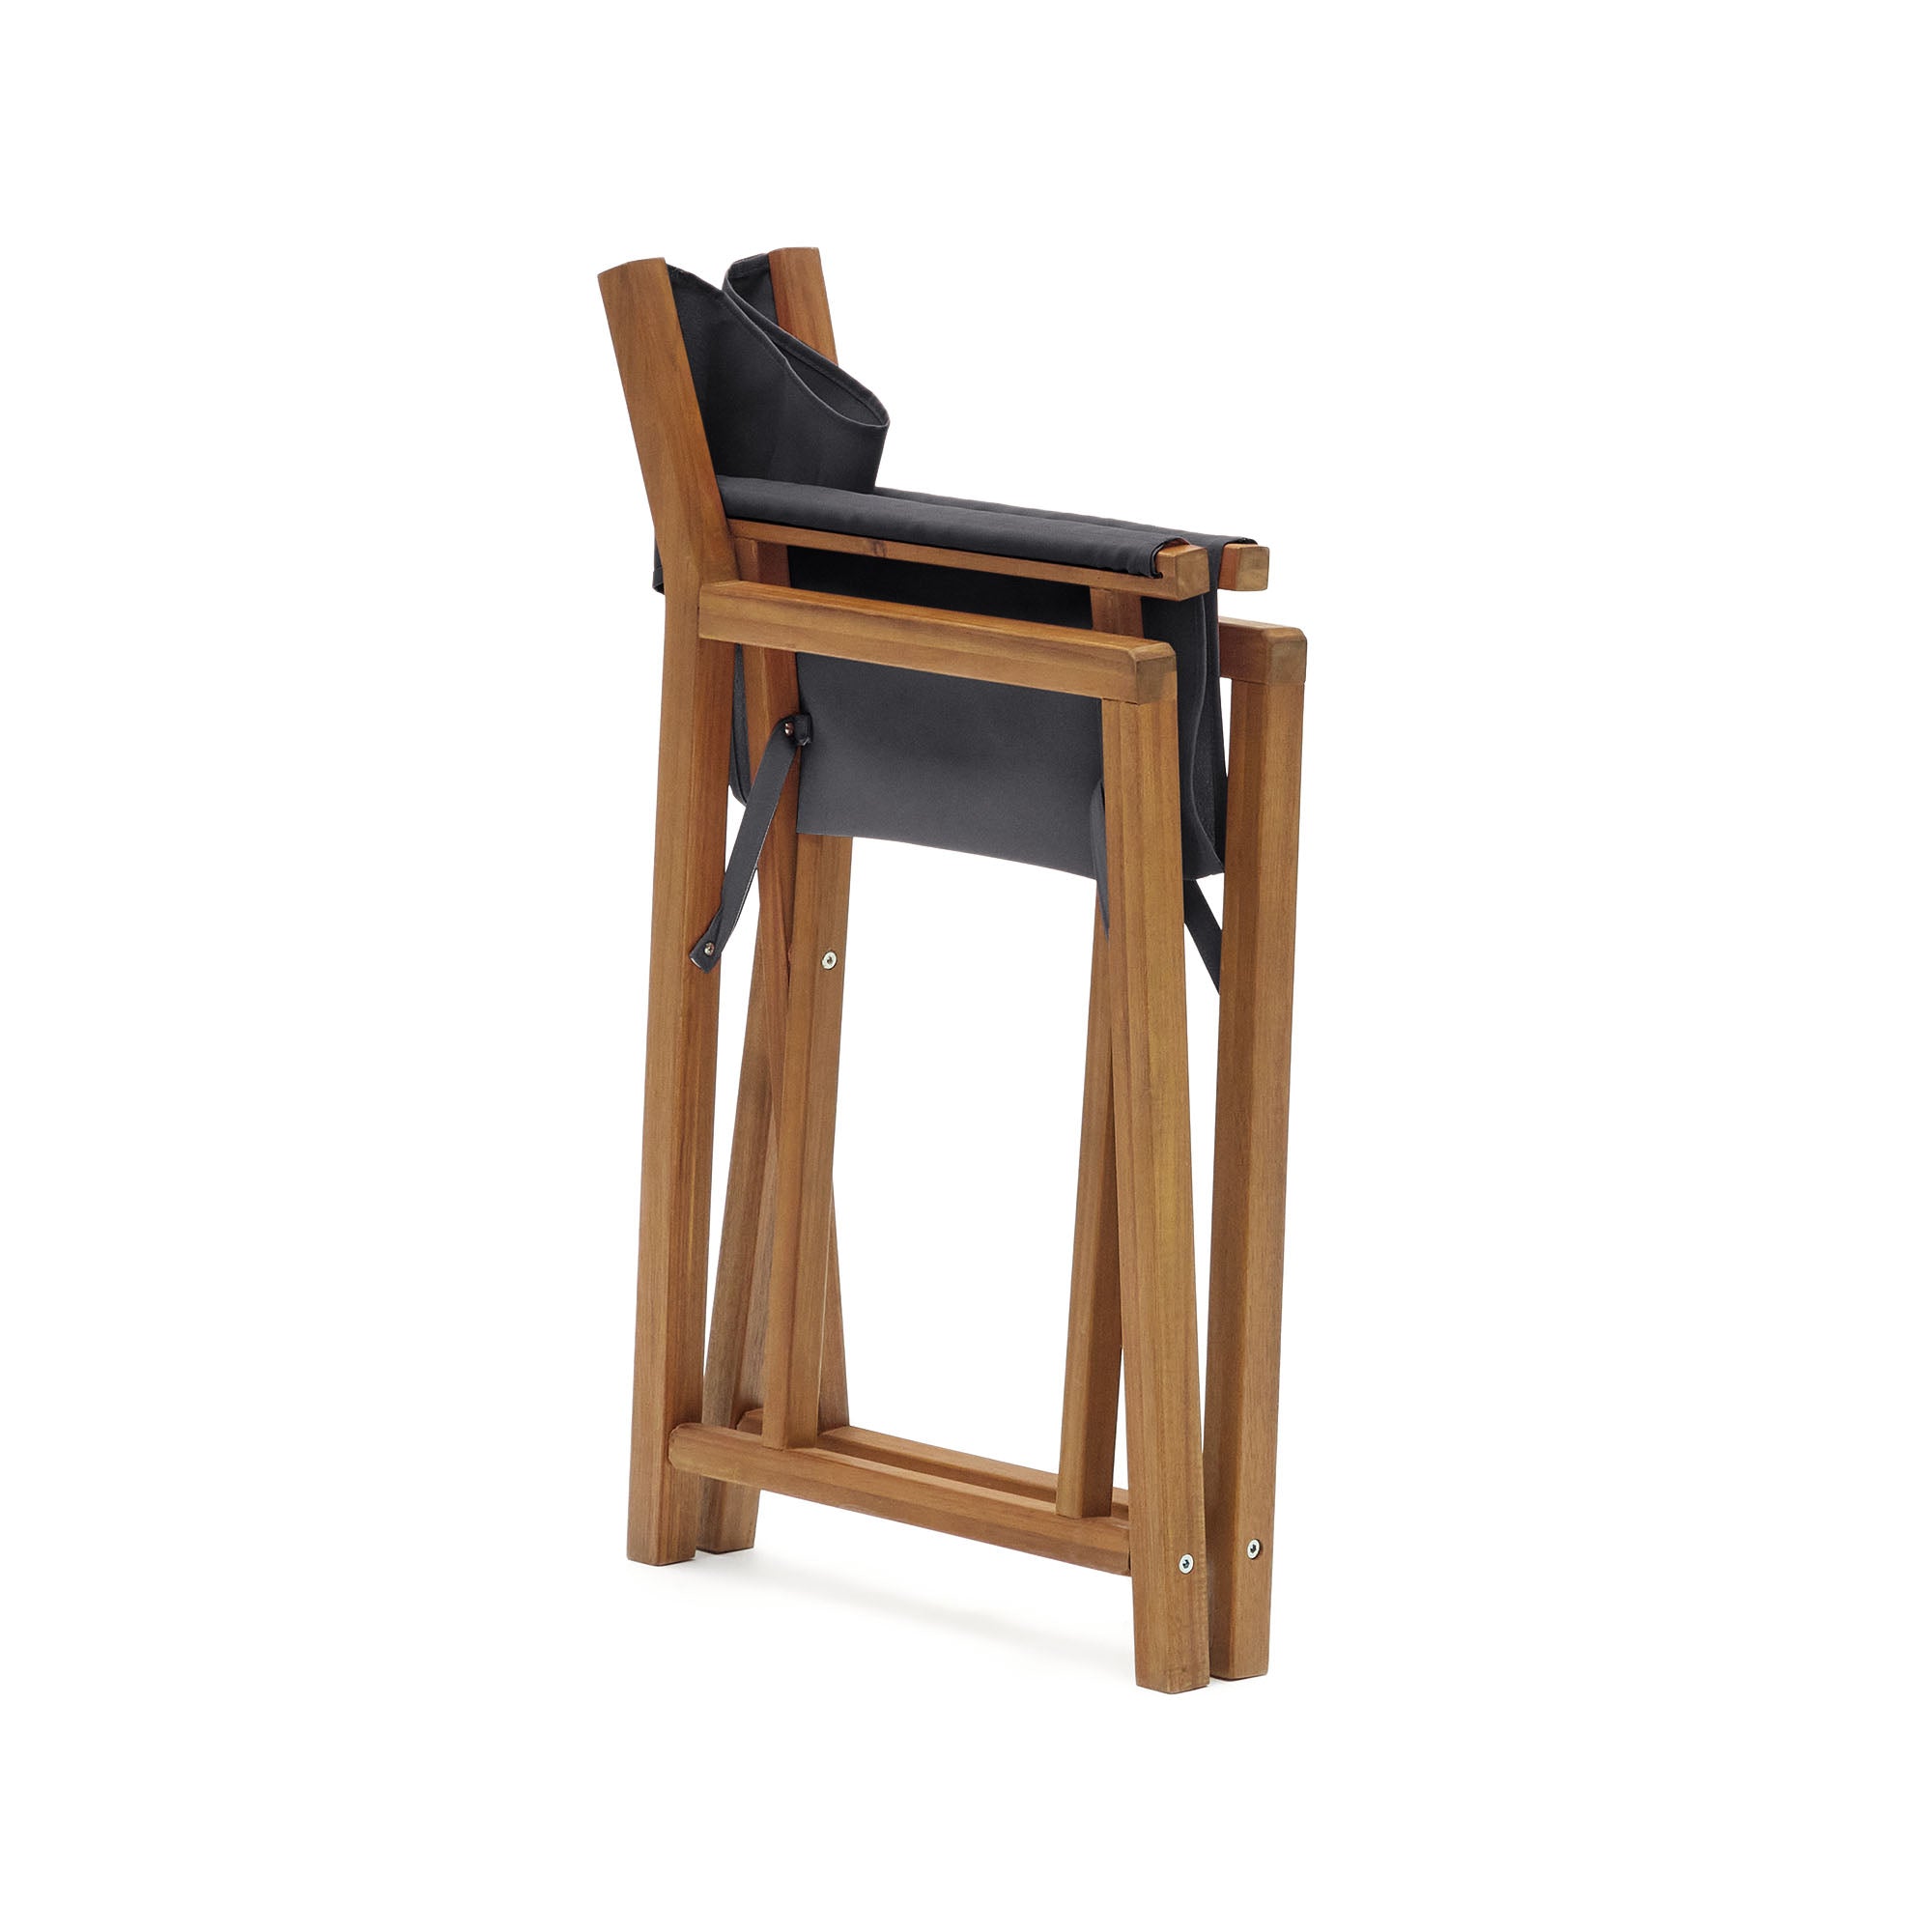 Thianna folding outdoor chair in black with solid acacia wood FSC 100%